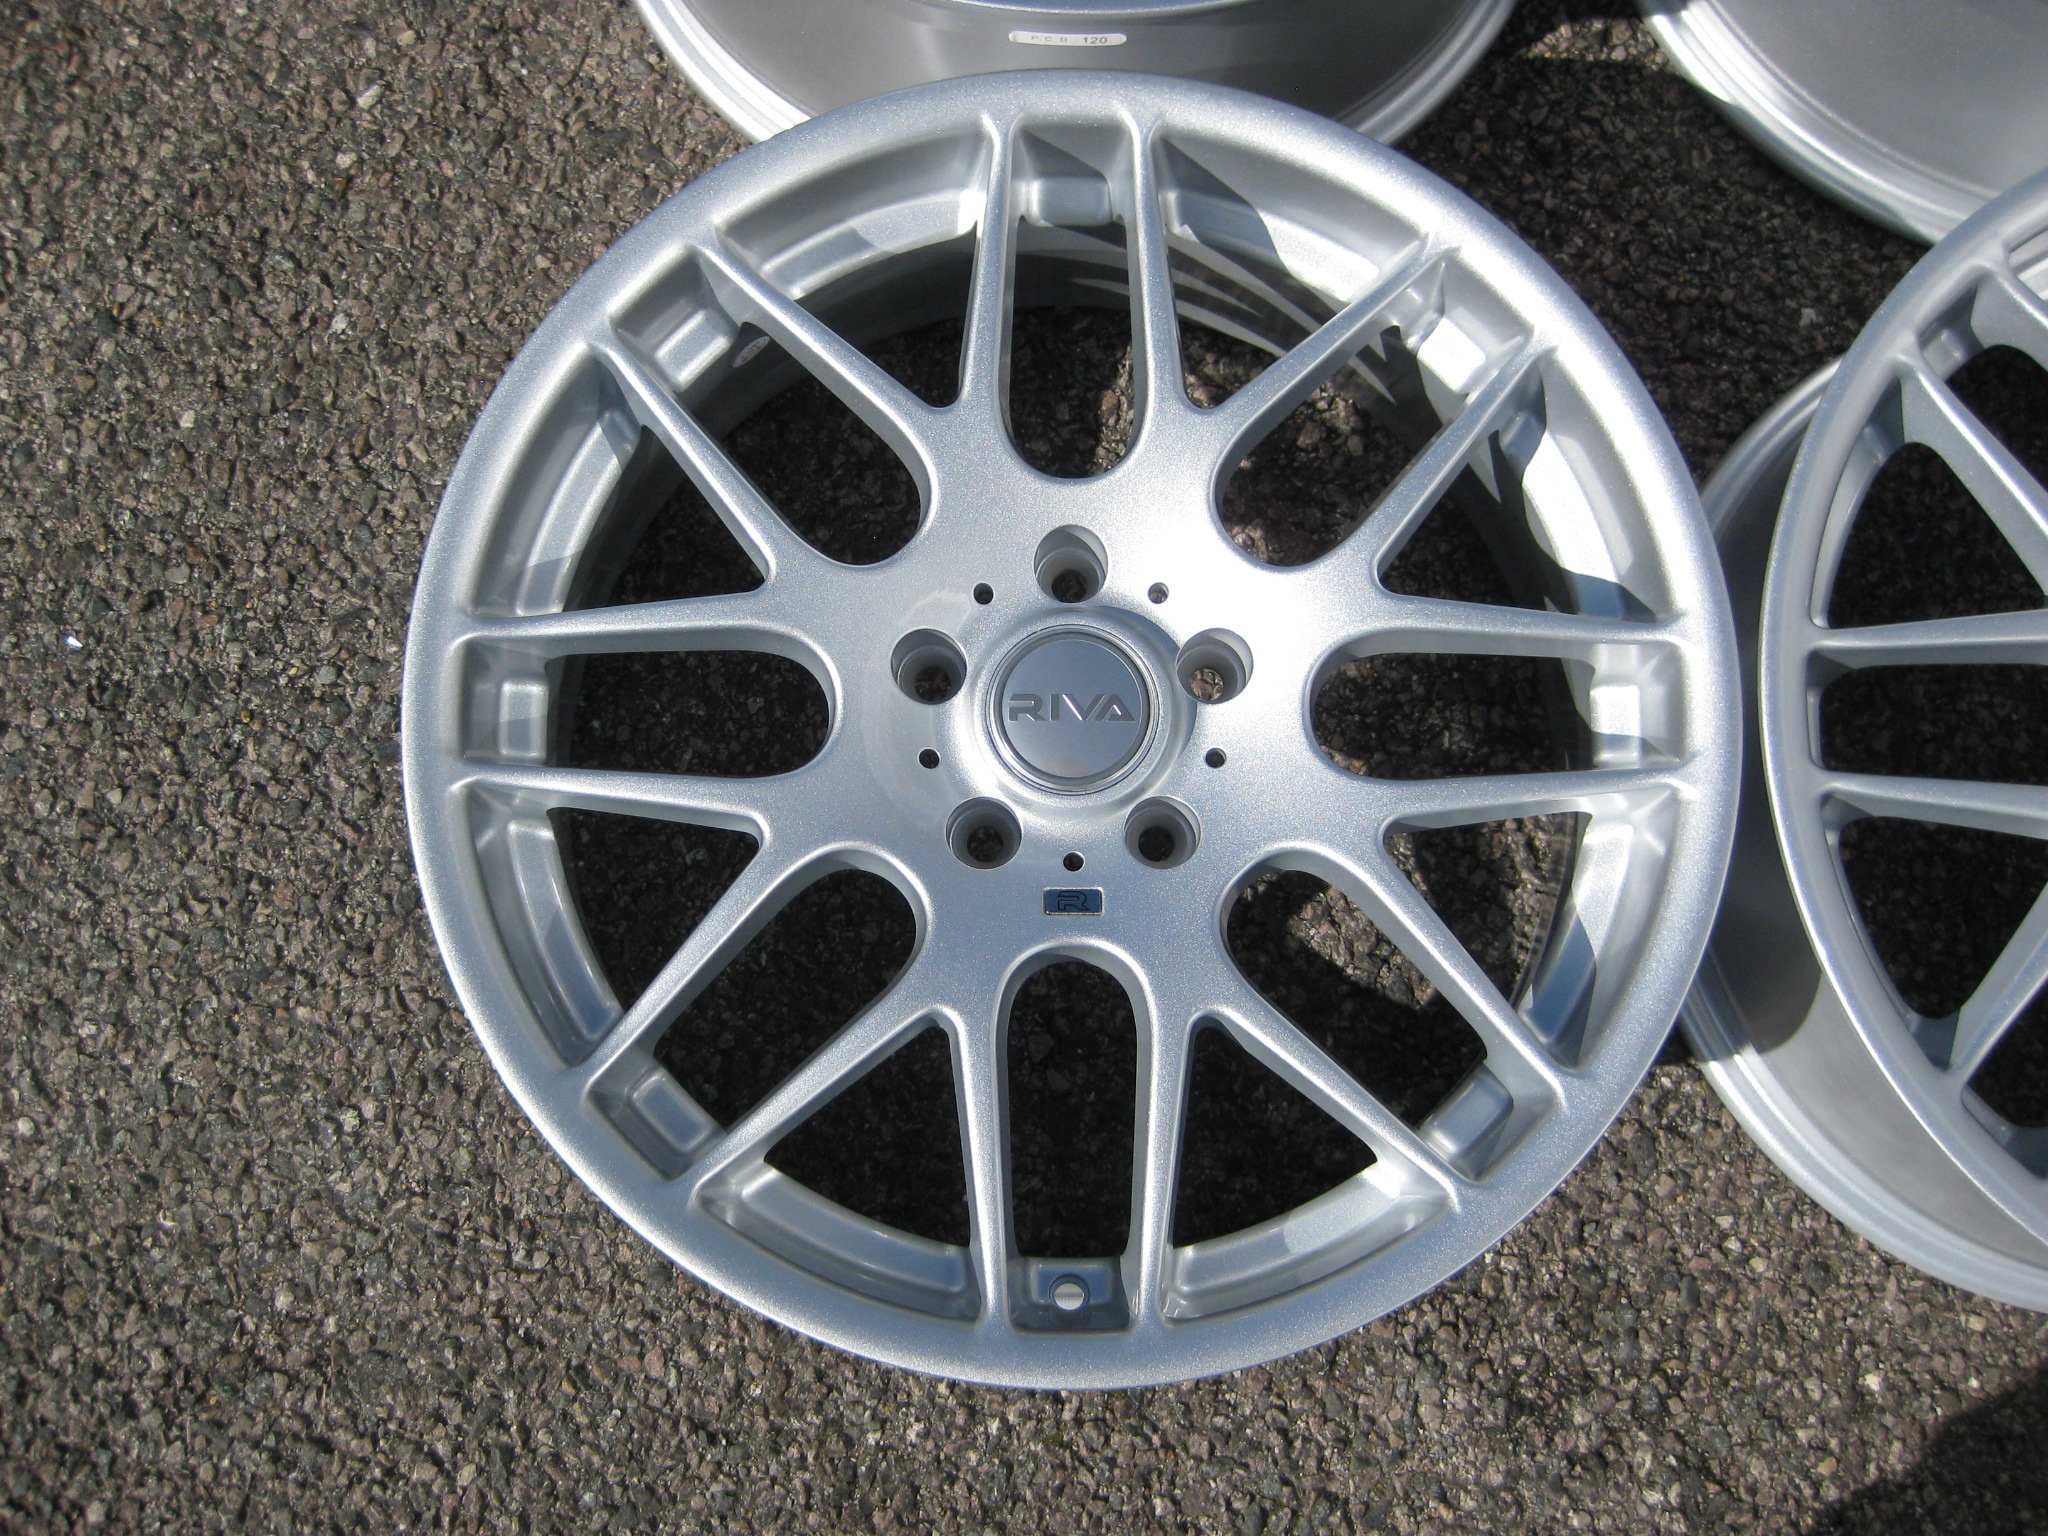 NEW 19" RIVA DTM CSL ALLOY WHEELS IN SILVER, DEEP CONCAVE 9" WIDE REAR